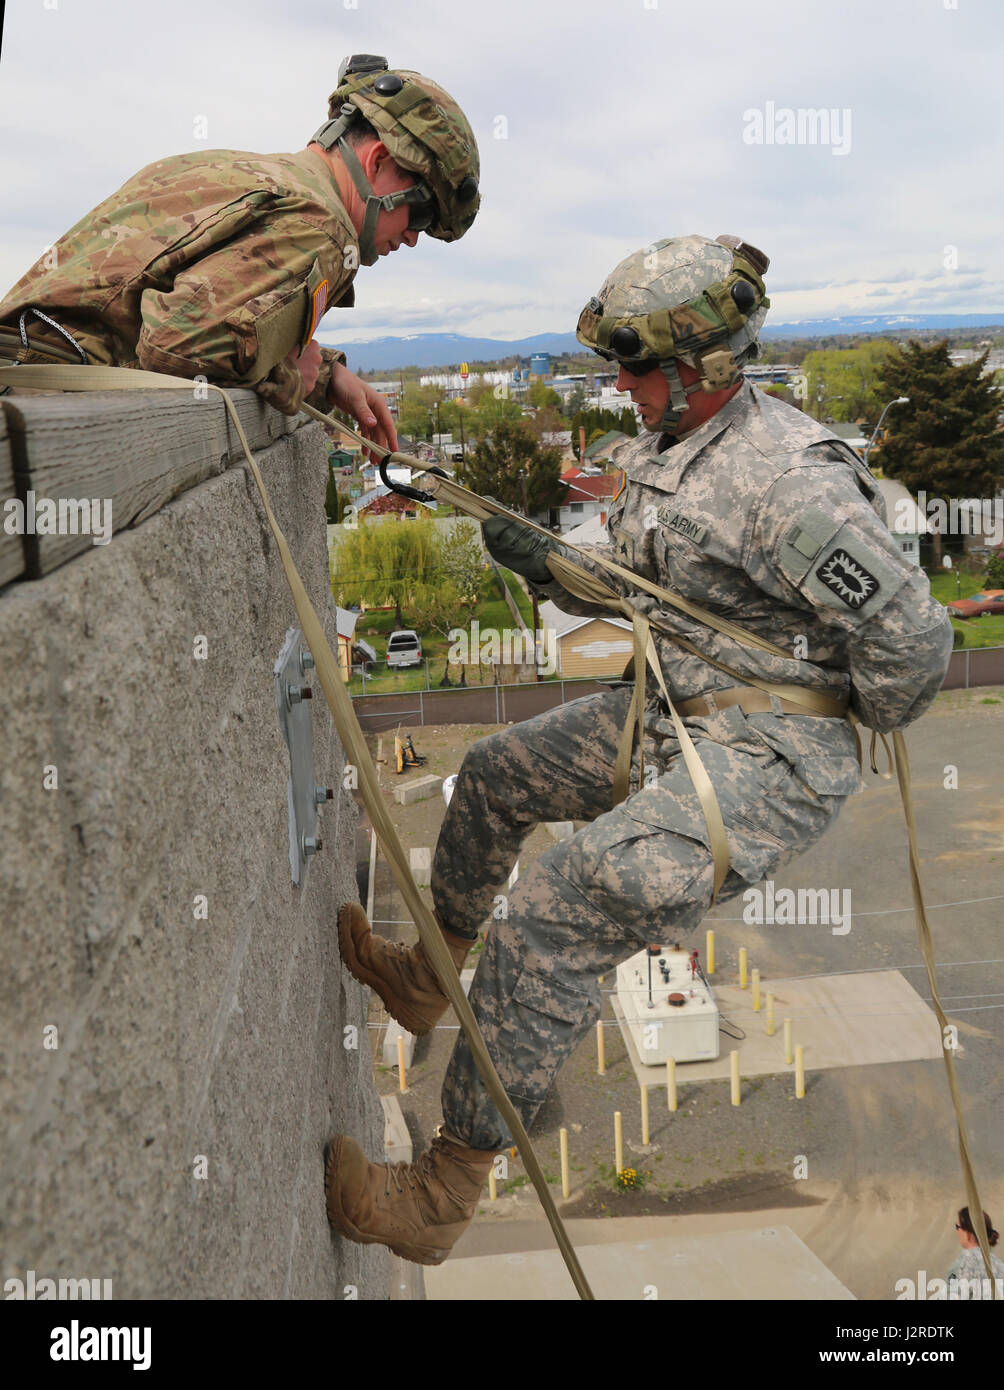 U.S. Army Sgt. Anthony Barba, 184th Headquarters and Headquarters Detachment (EOD), 184th Ordnance Disposal Battalion (EOD), 52nd Ordnance Group (EOD), prepares to lower himself during a vertical access training exercise at Yakima Fire Station 95, Yakima, Wash., April 25, 2017. The vertical access training is designed to create adaptive leaders capable of solving various threats in hostile and friendly environments. (U.S. Army photo by Sgt. Kalie Jones) Stock Photo